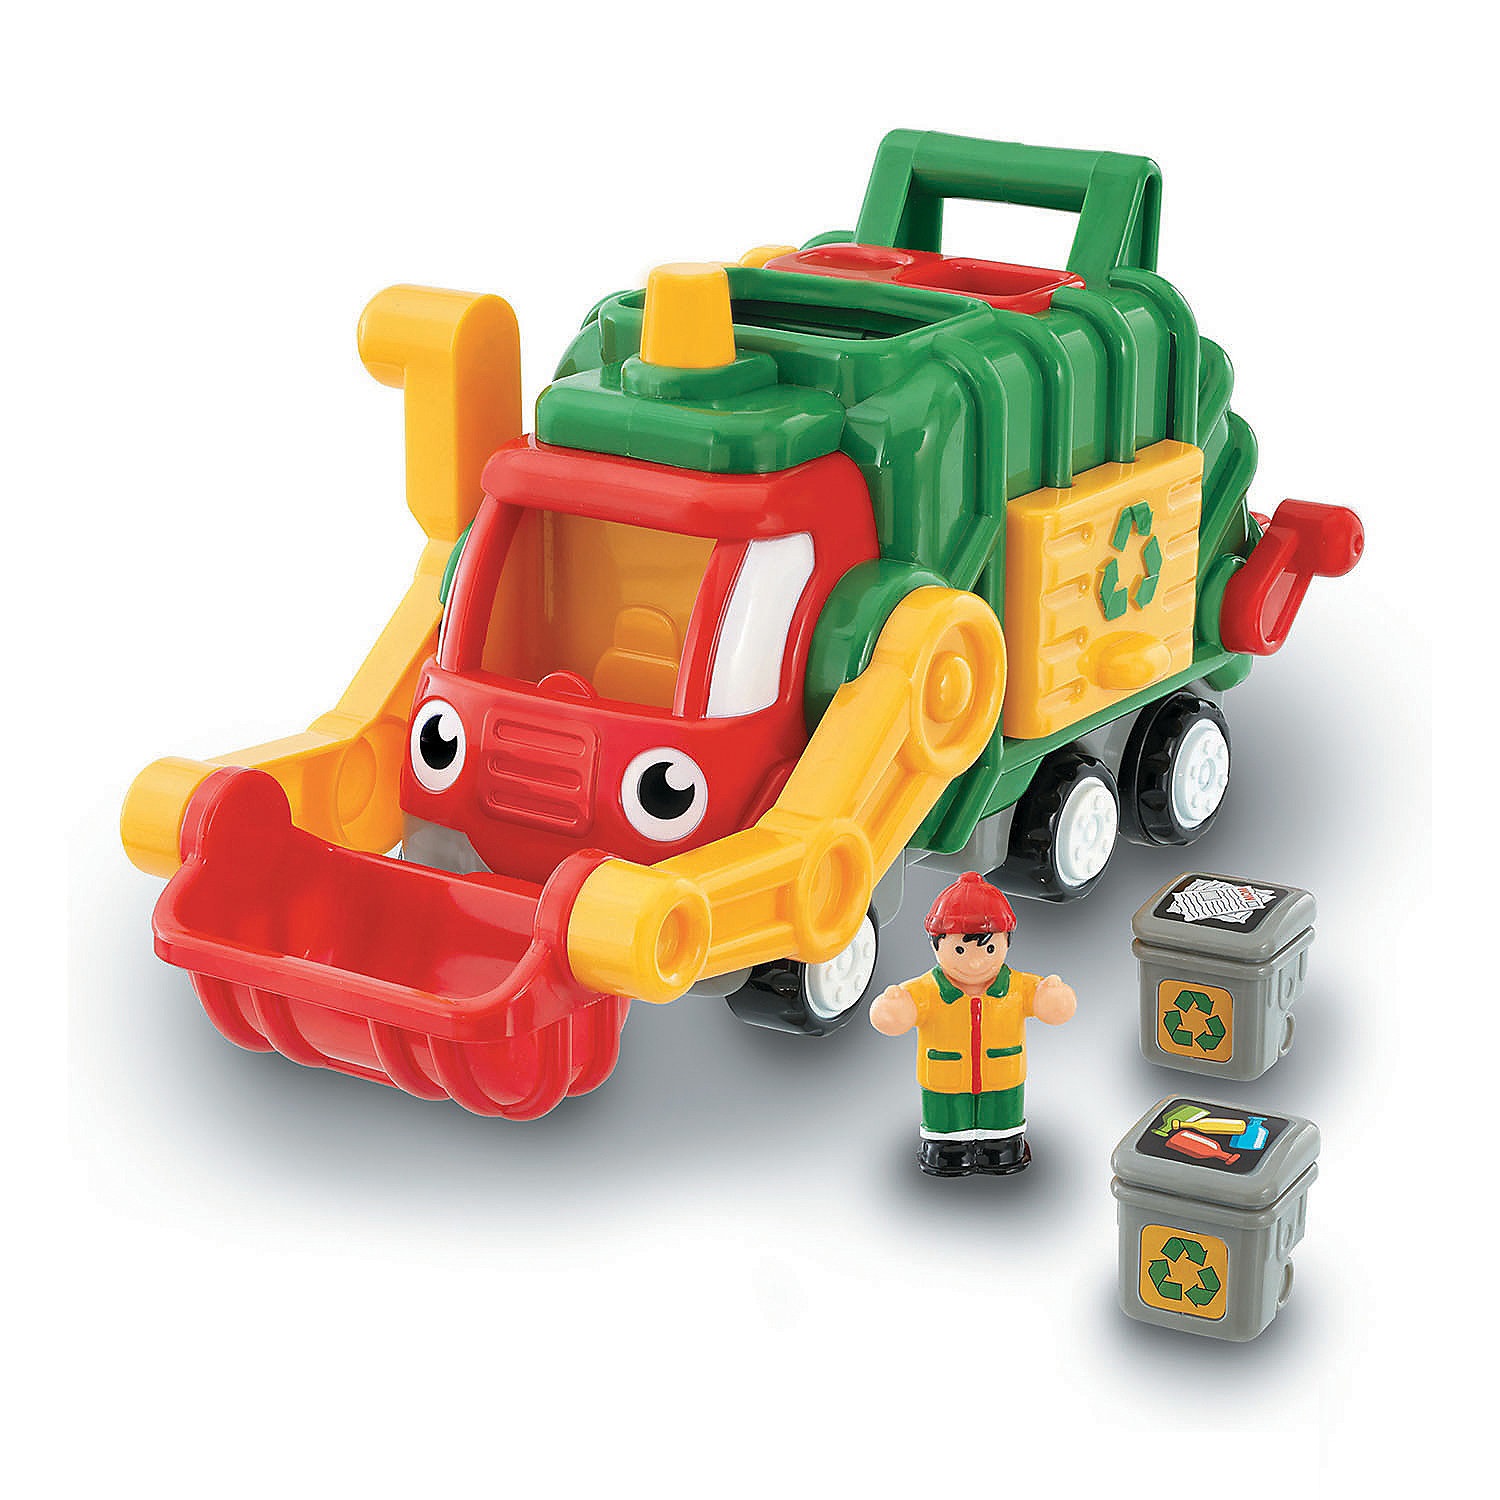 flip-n-tip-fred-recycling-truck-toy_13844676